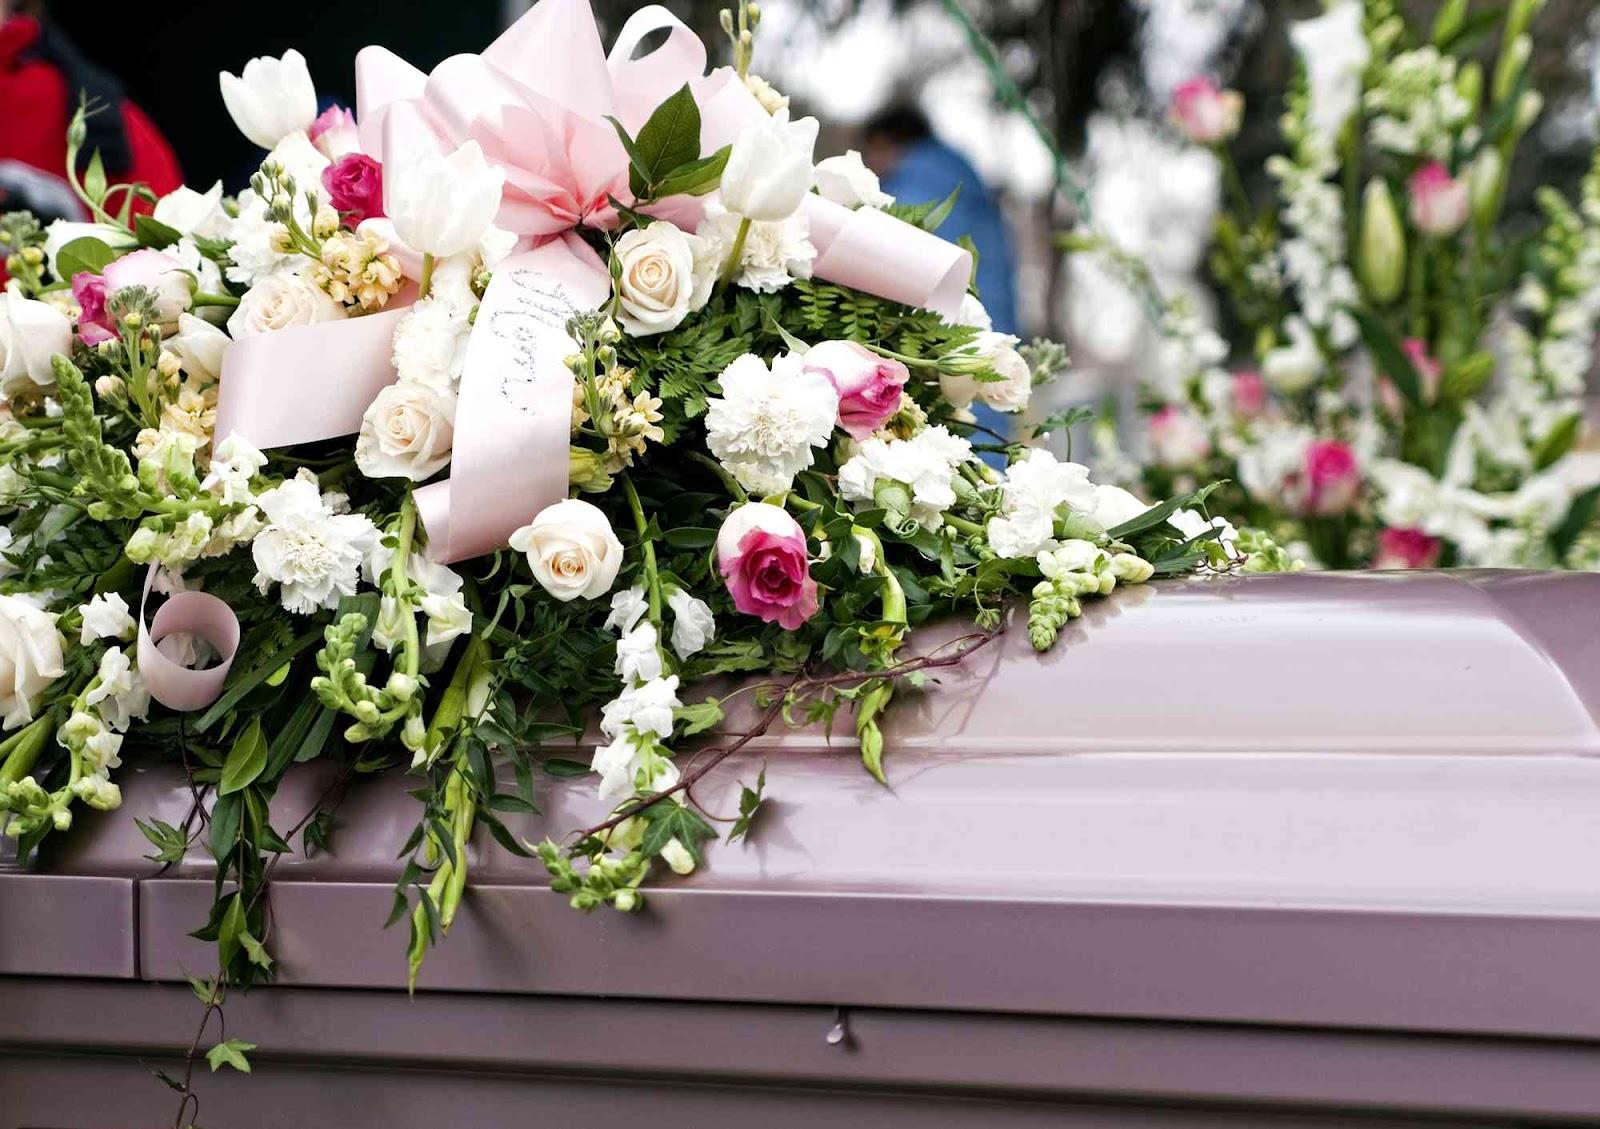 What Flowers Are Used in Funeral Arrangements?